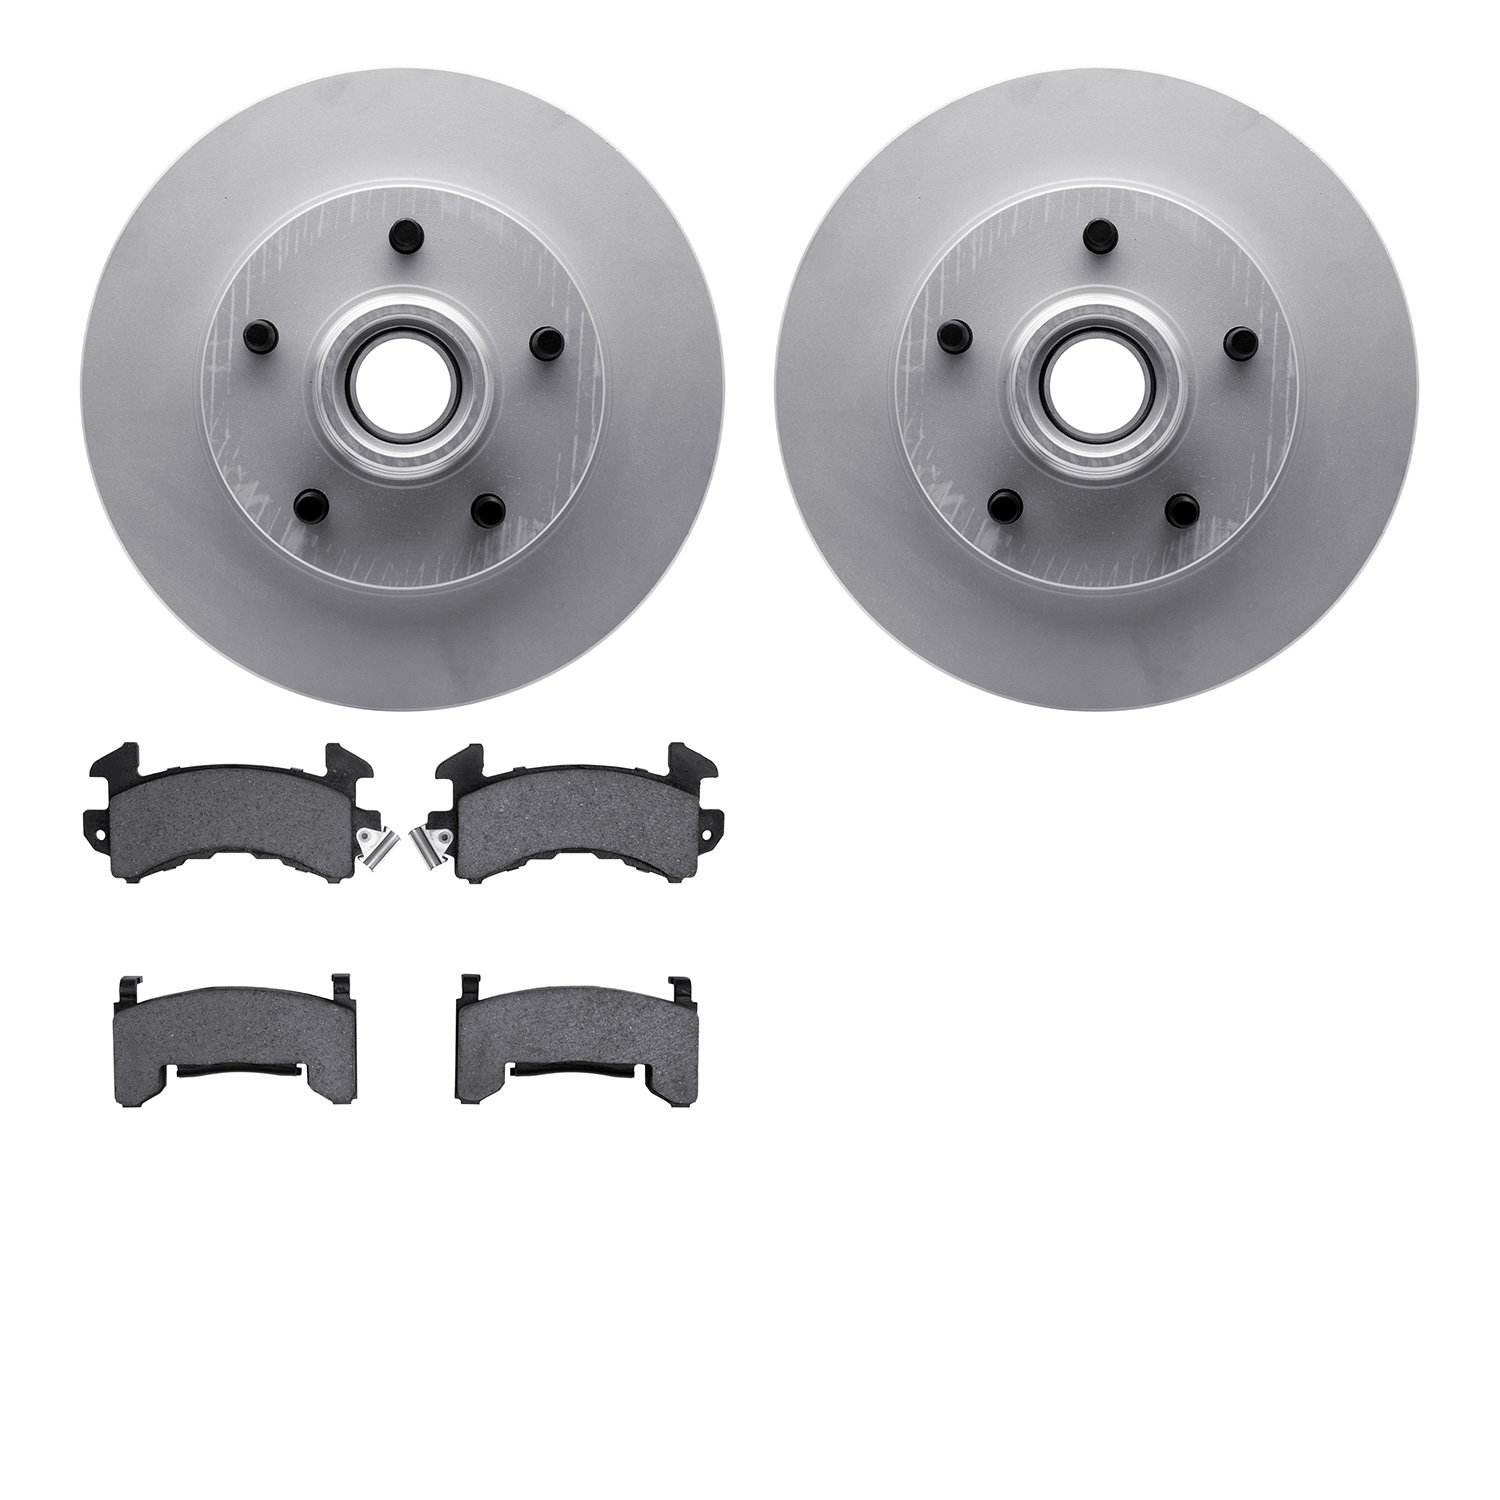 4402-47005 Geospec Brake Rotors with Ultimate-Duty Brake Pads Kit, 1982-1995 GM, Position: Front